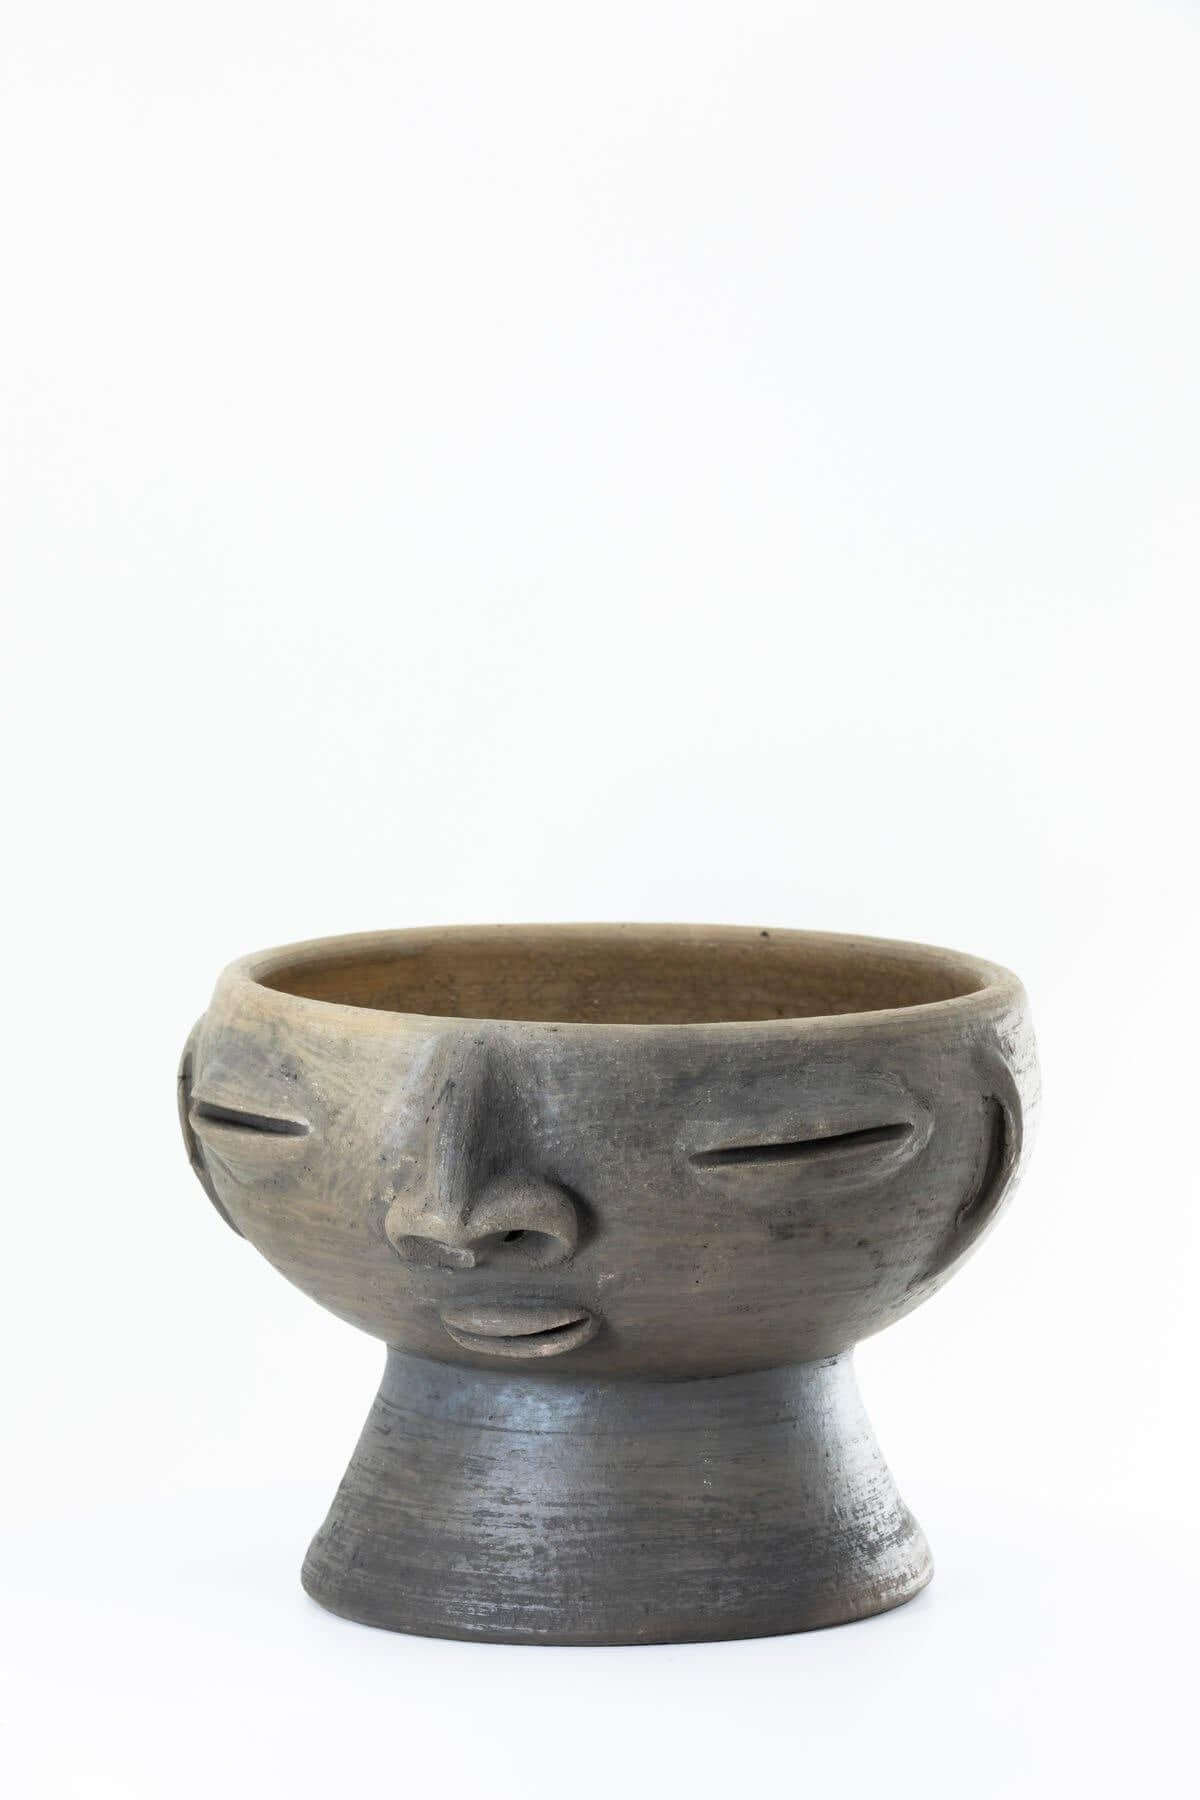 Faced Elevated Ceramic Bowl by Ana María Hernández - Wool+Clay